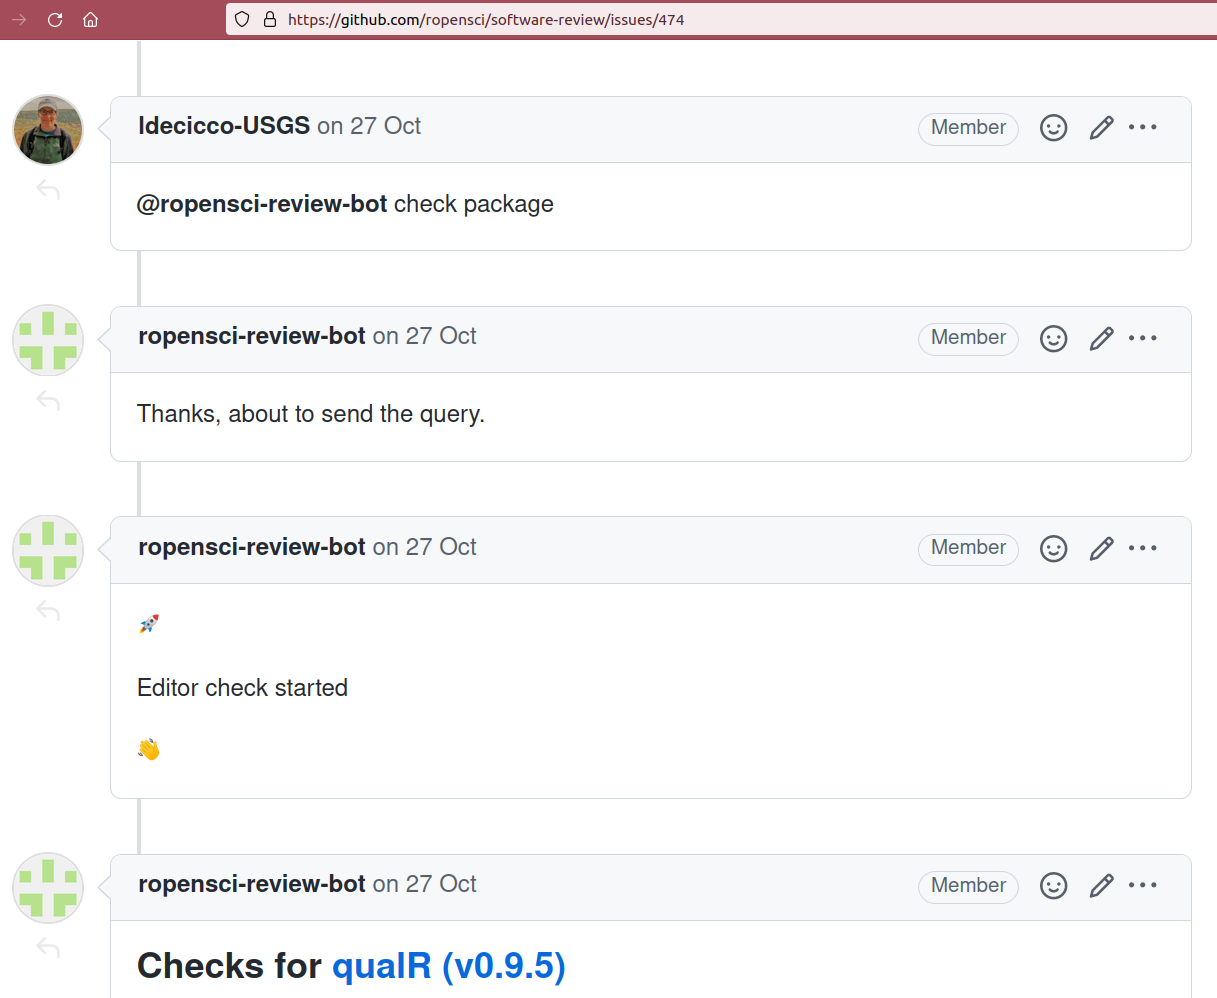 Screenshot of a GitHub issue corresponding to a package submission. Editor requires new checks via '@ropensci-review-bot check package', then results are posted.